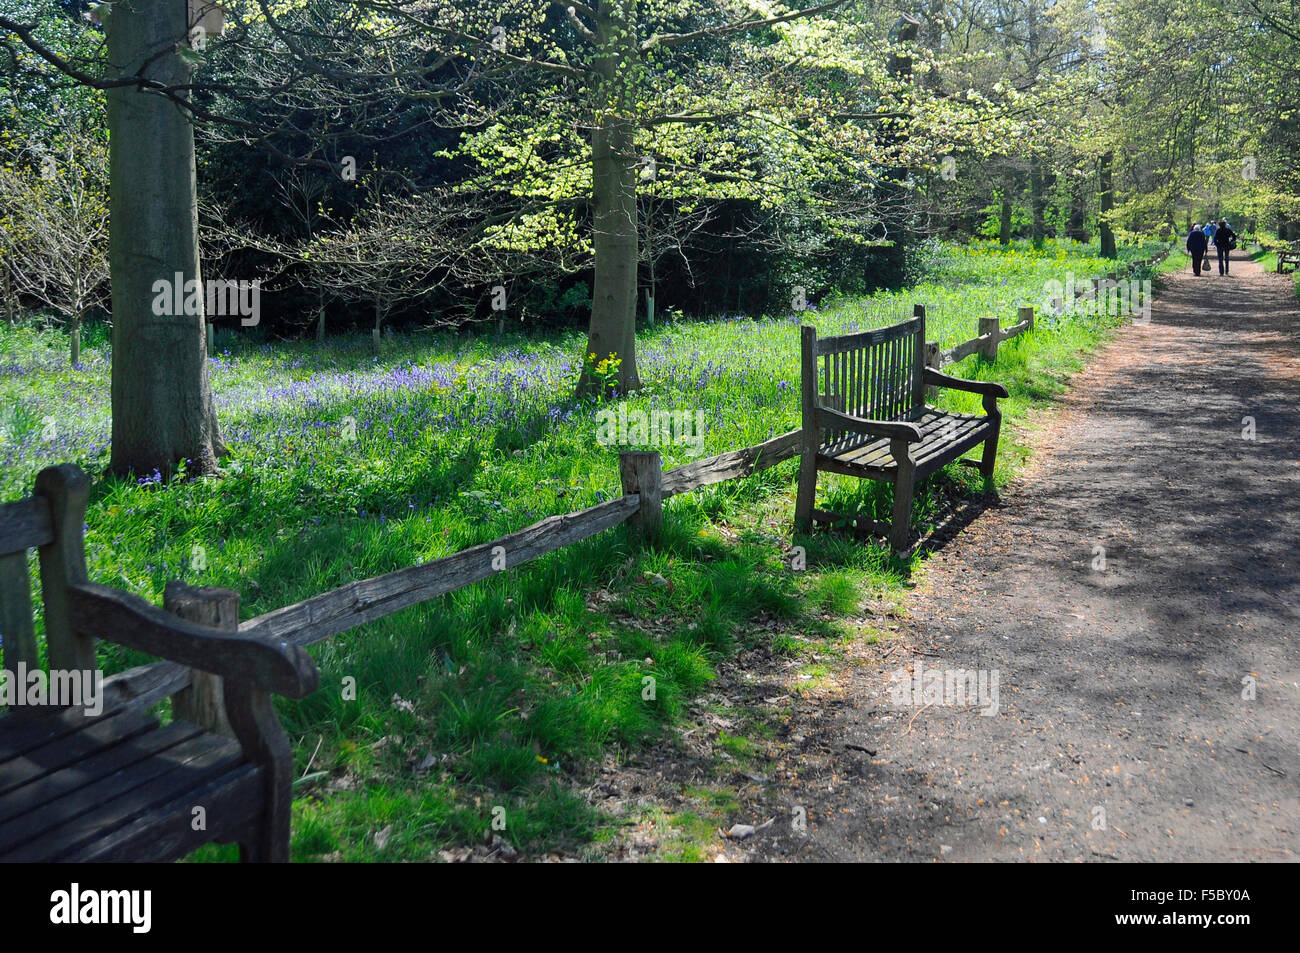 Park benches in the alleyway wooded area with bluebells people strolling at Kew Gardens London England Stock Photo